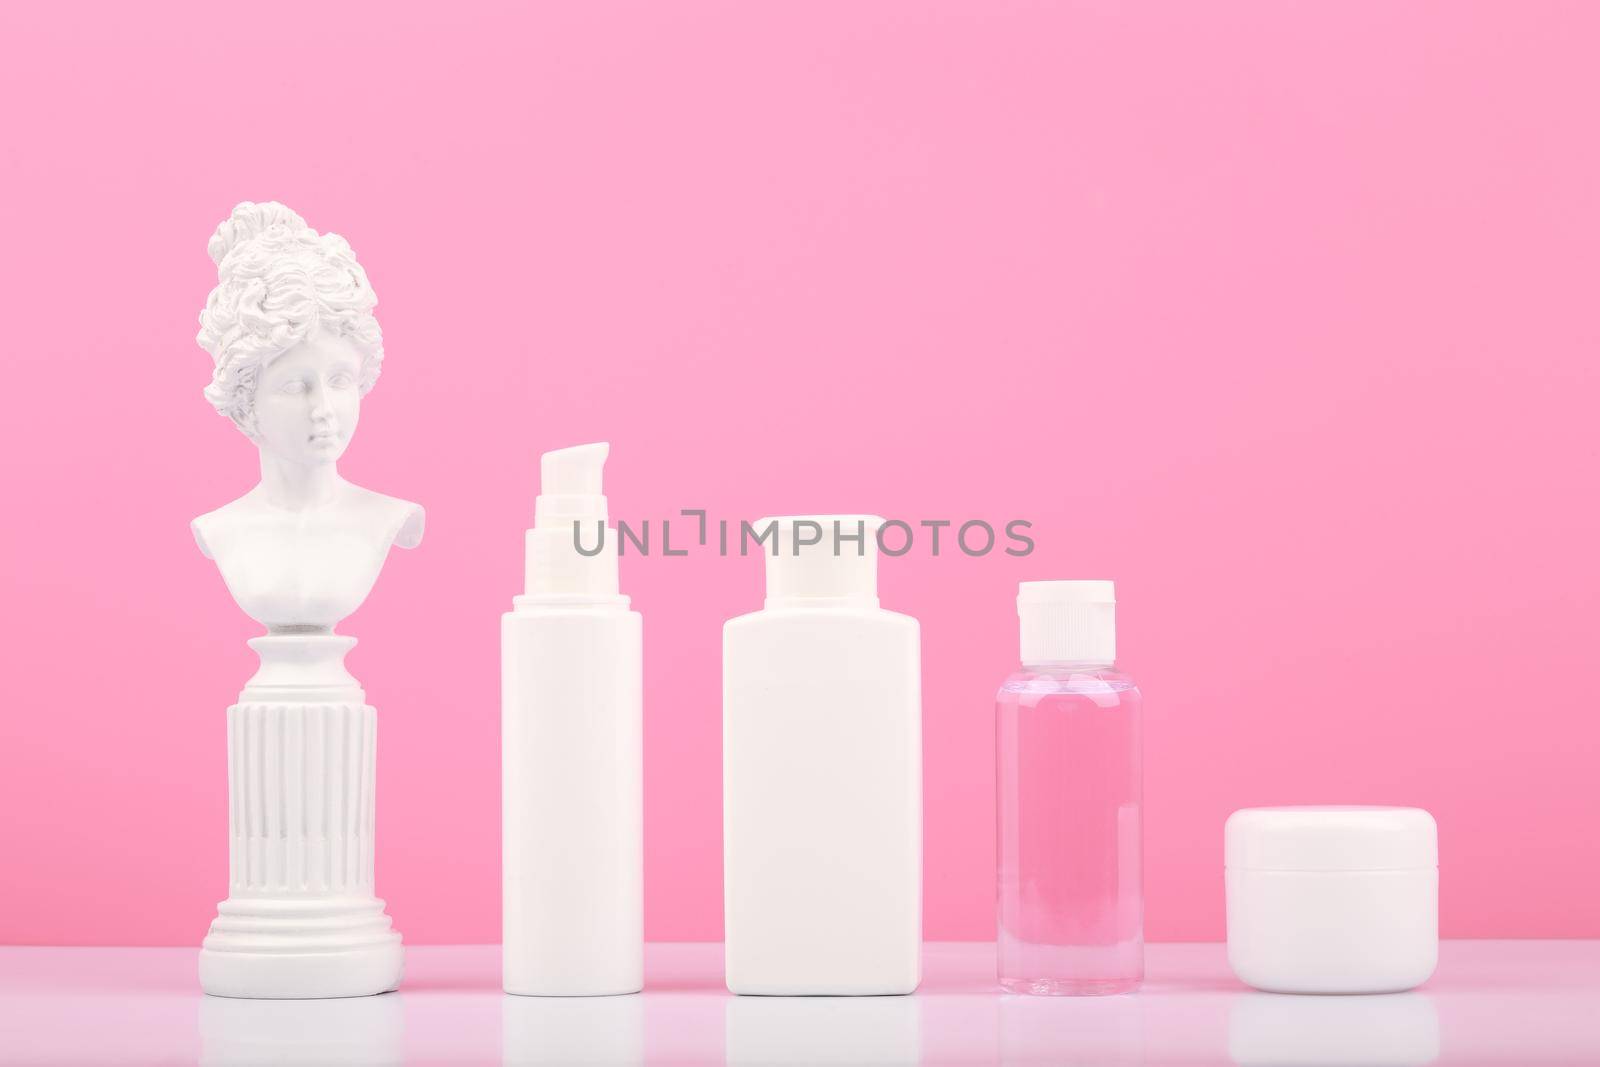 Set of beauty products for daily skin care on white table against bright pink background with white gypsum statue. Unbranded cosmetic bottles for daily skin routine